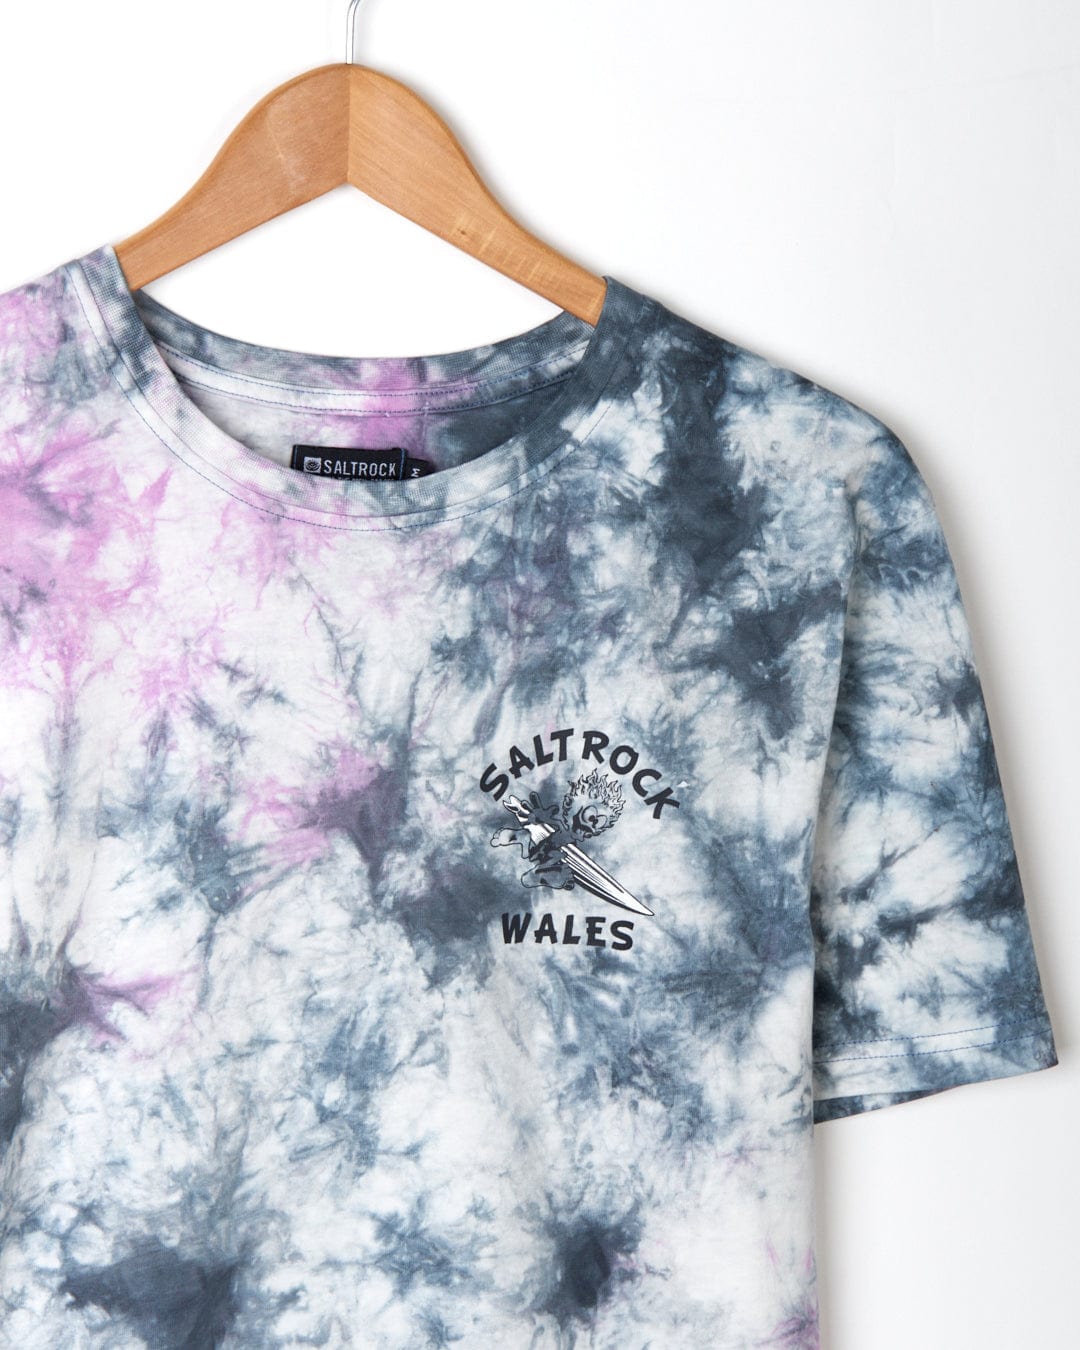 Wave Rider Wales - Mens Short Sleeve T-Shirt - Pink Tie Dye with Saltrock branding hanging on a wooden hanger against a white background.